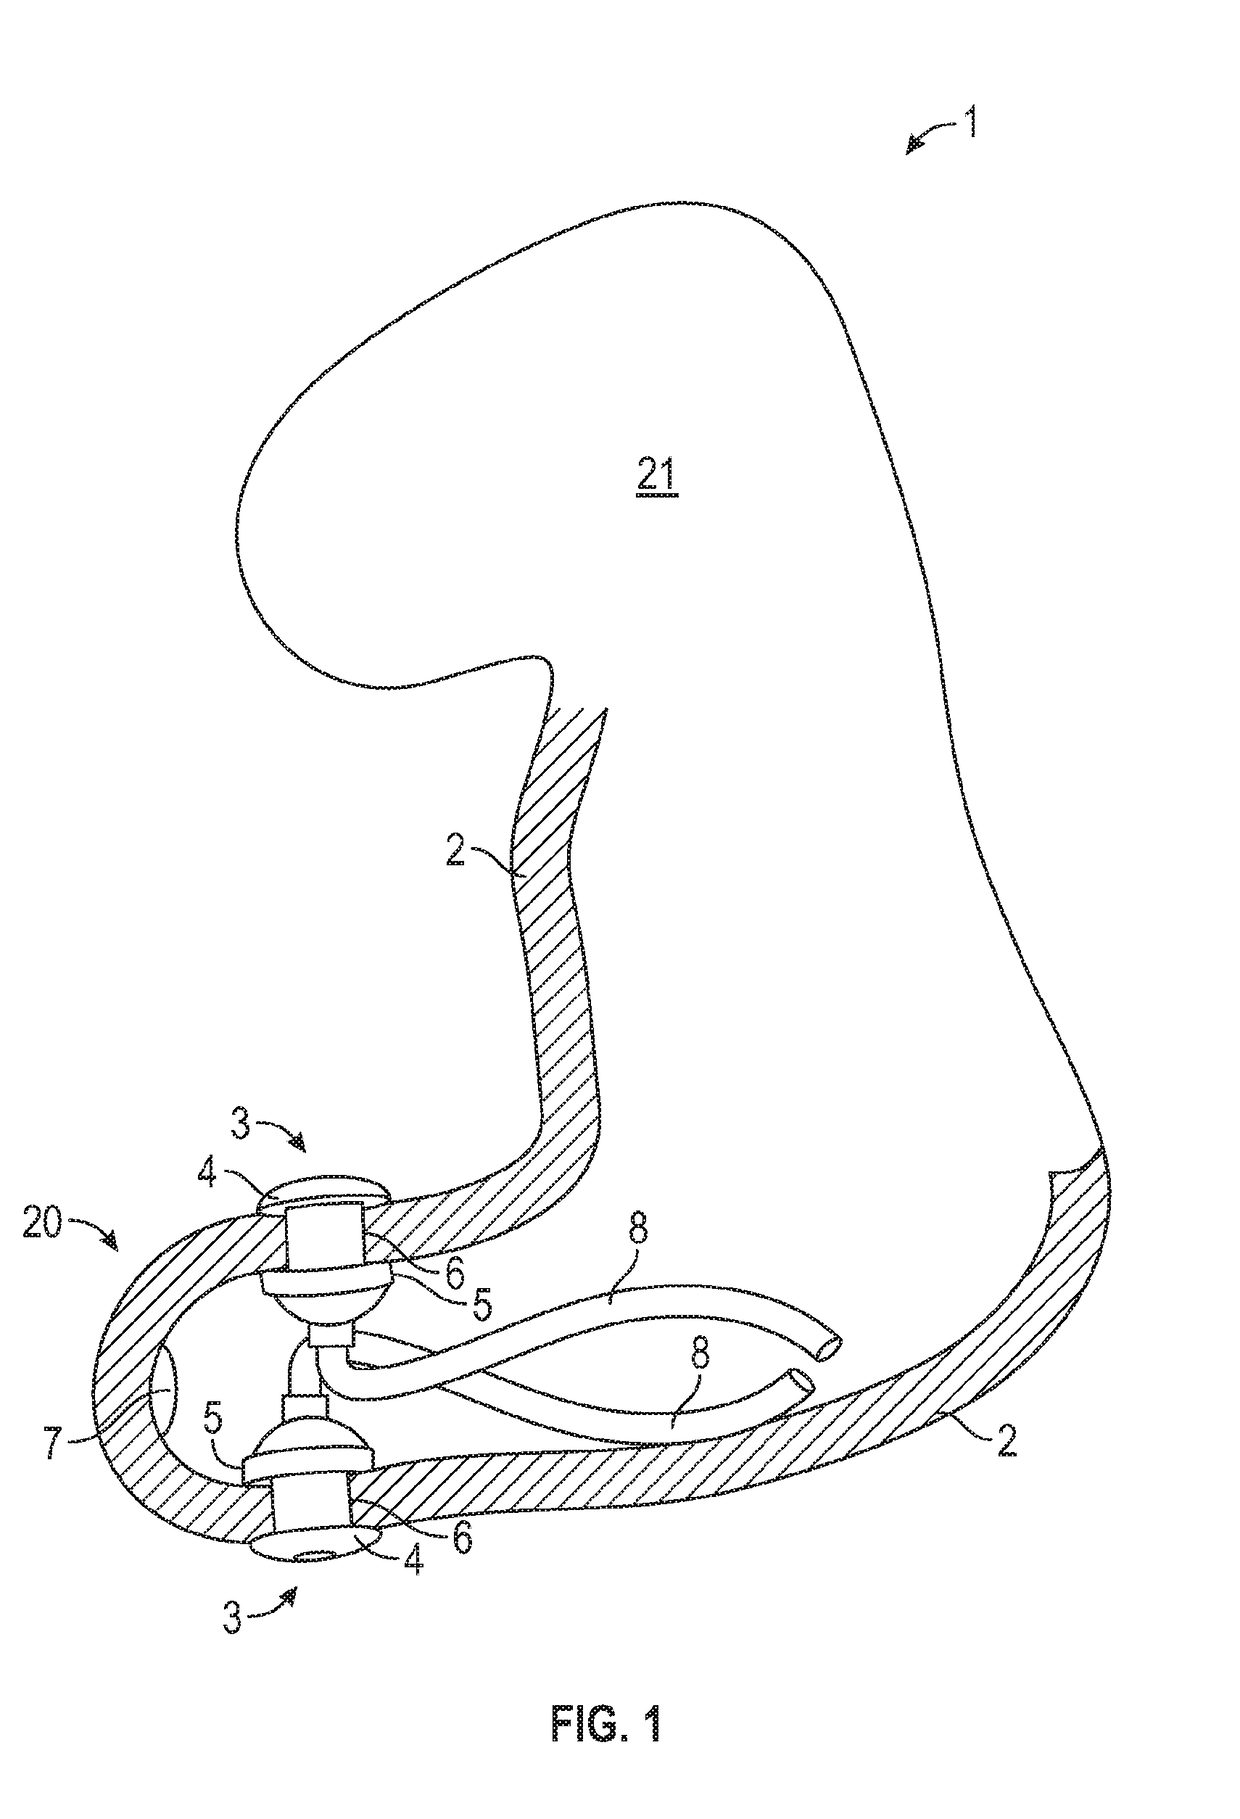 Ear canal plug for detecting bio-electrical signals